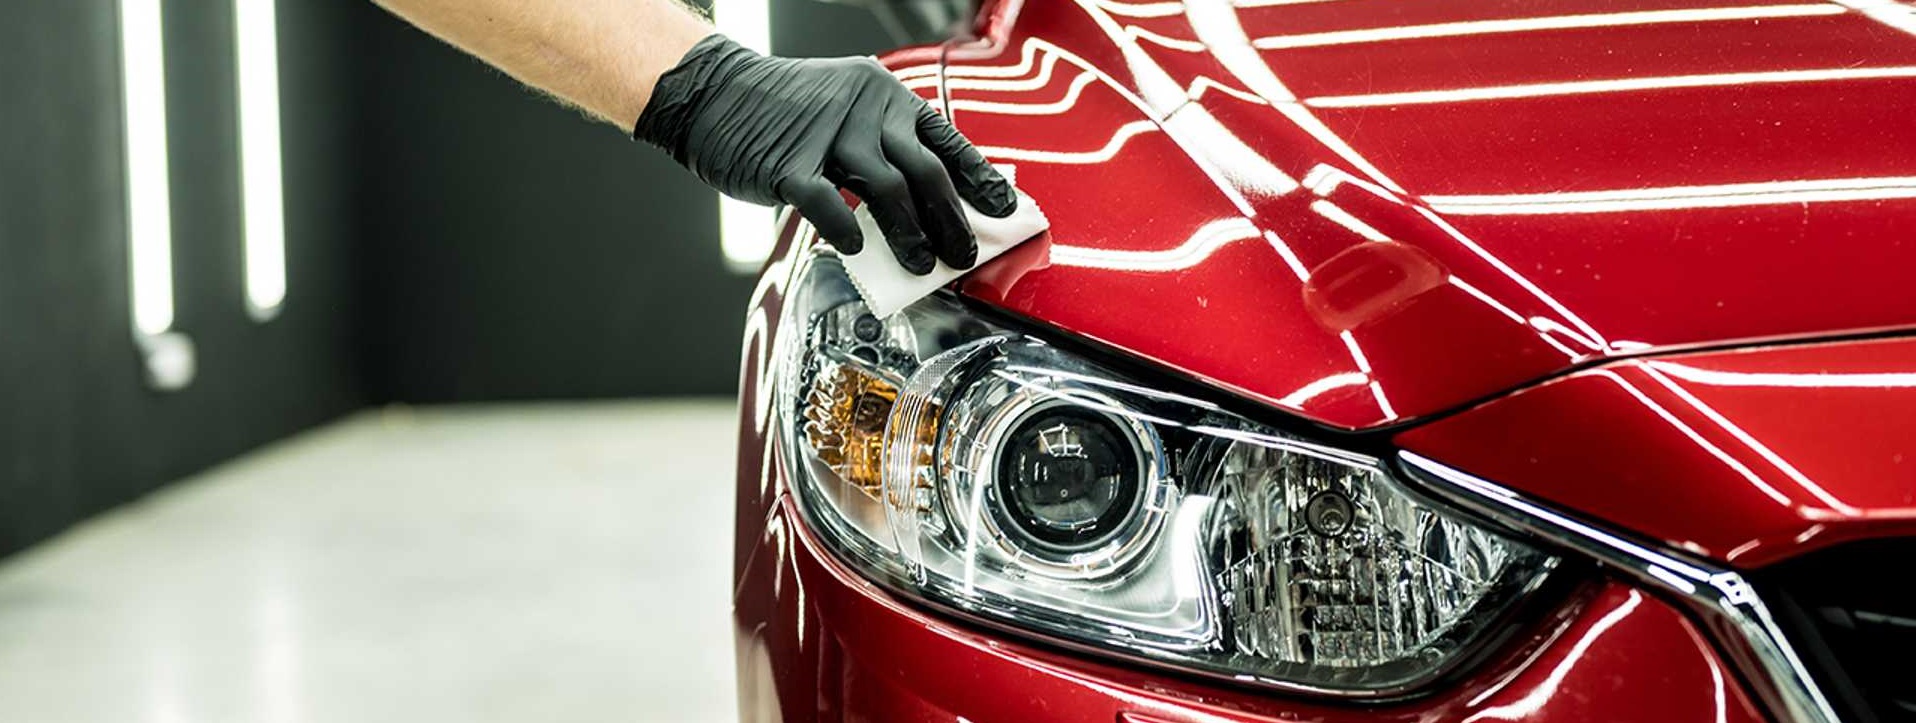 Everything You Need to Know About Ceramic Coating for Cars